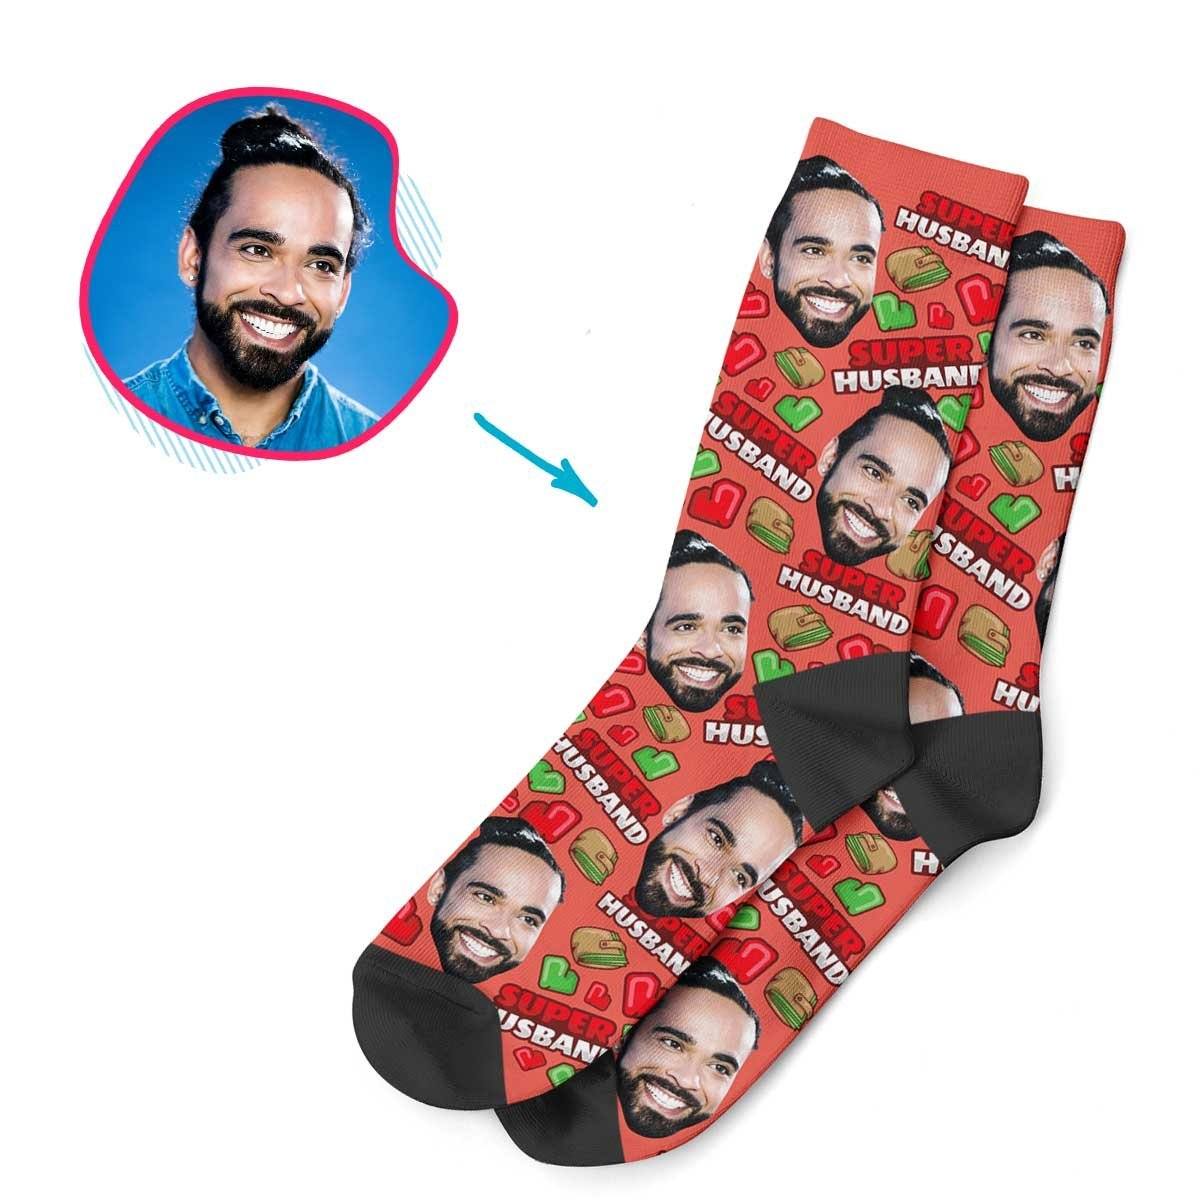 Red Husband personalized socks with photo of face printed on them